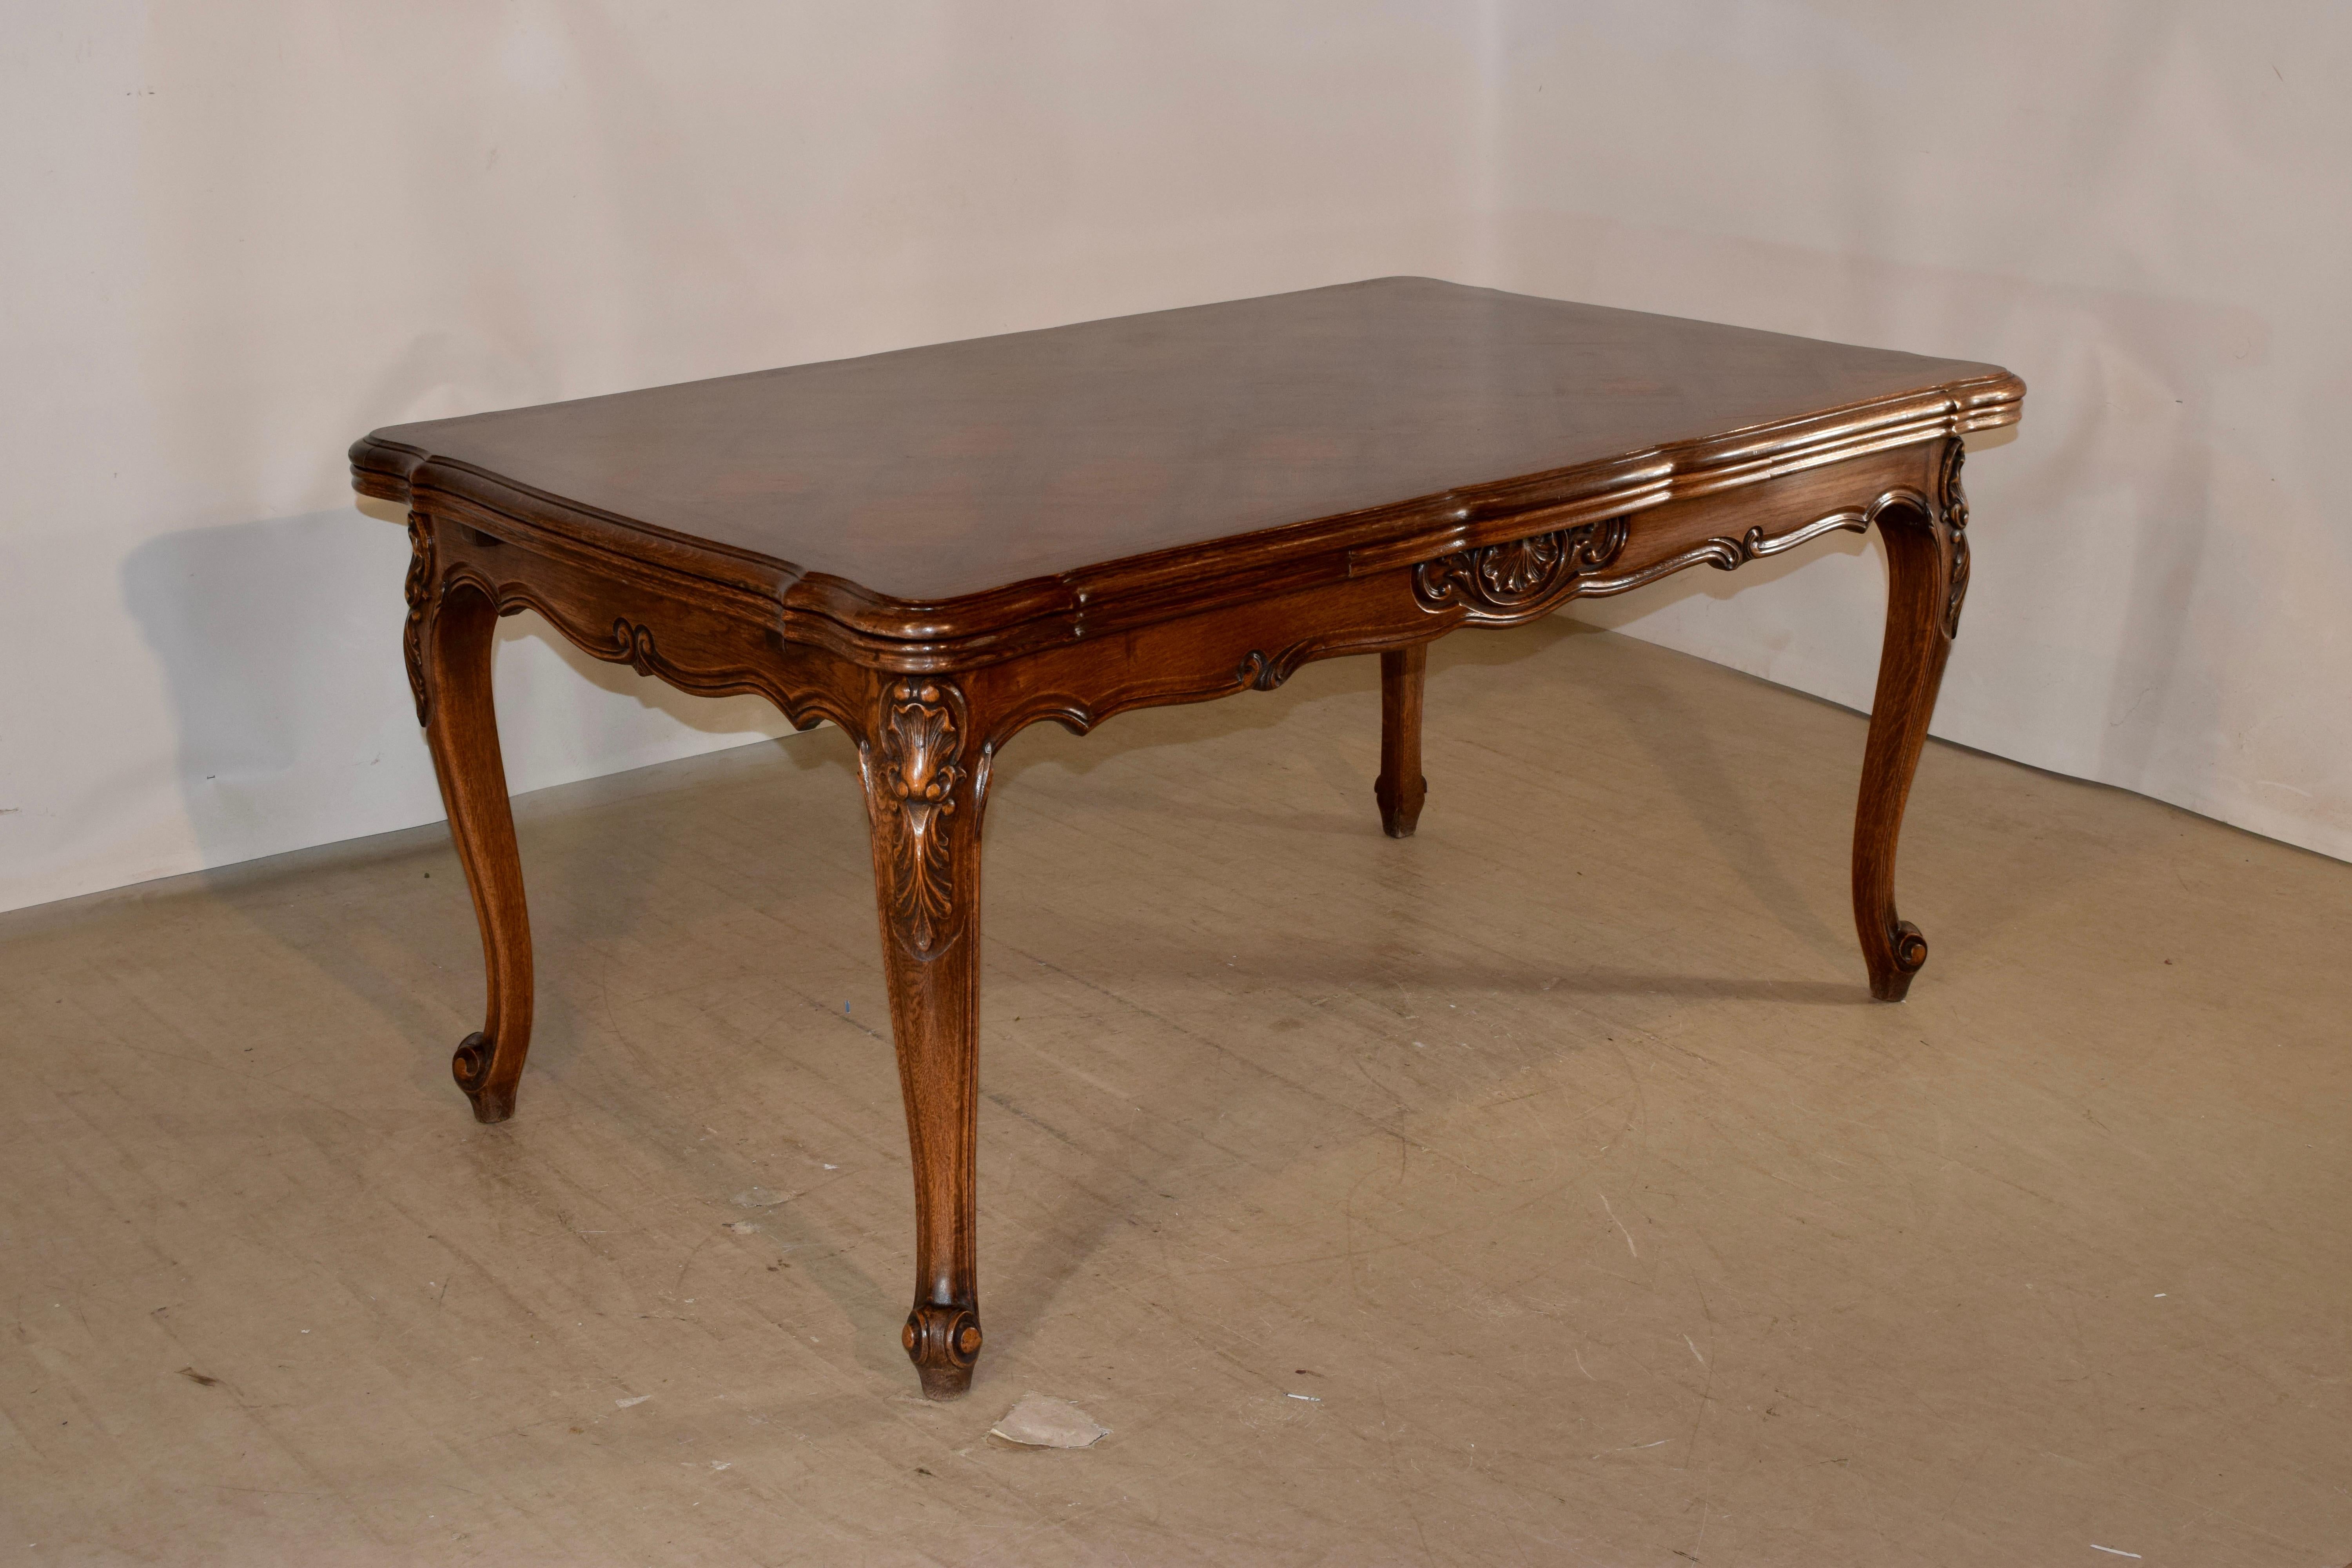 Late 19th century French draw leaf table made from oak with a banded and parqueted top and two extending leaves, following down to a hand scalloped and carved decorated apron and supported on hand carved cabriole legs with carved shell decorations